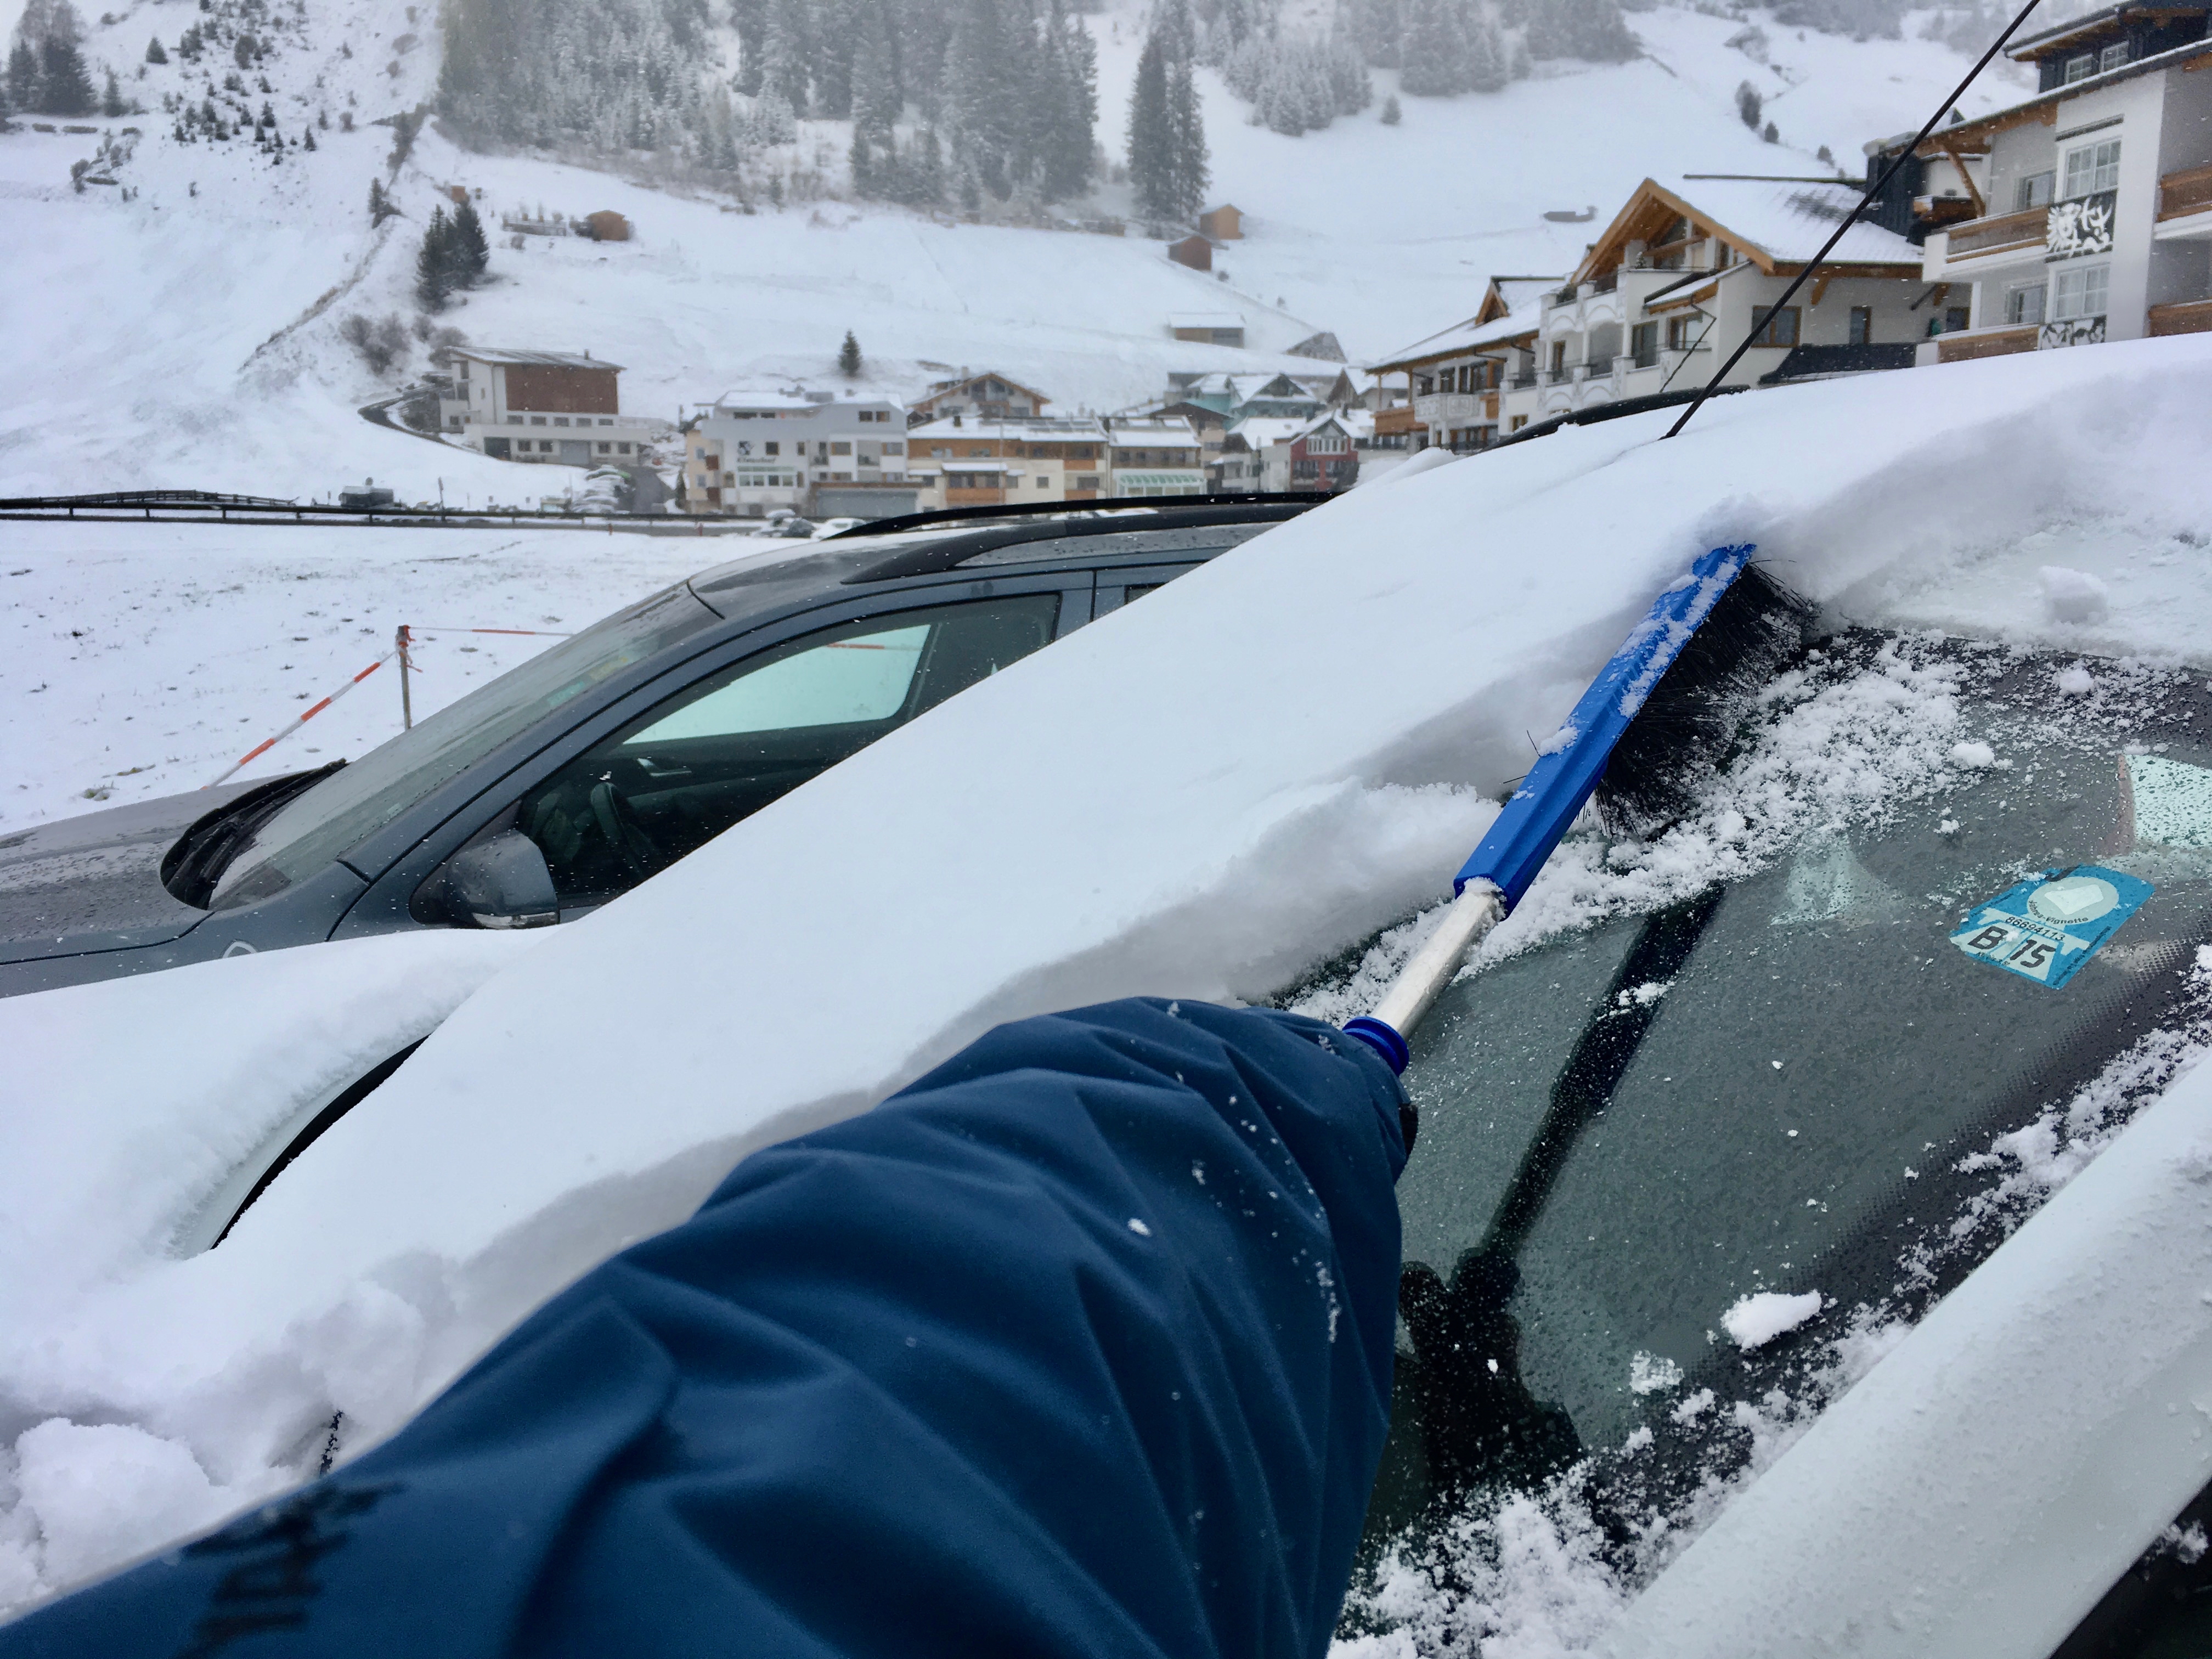 Heavy snow fall is a possibility at any time in the Alps, even right at the end of the season (this photos was taken on 28 April, the day before Ischgl closed for the season). A good brush is great for shifting snow without scratching your car. 